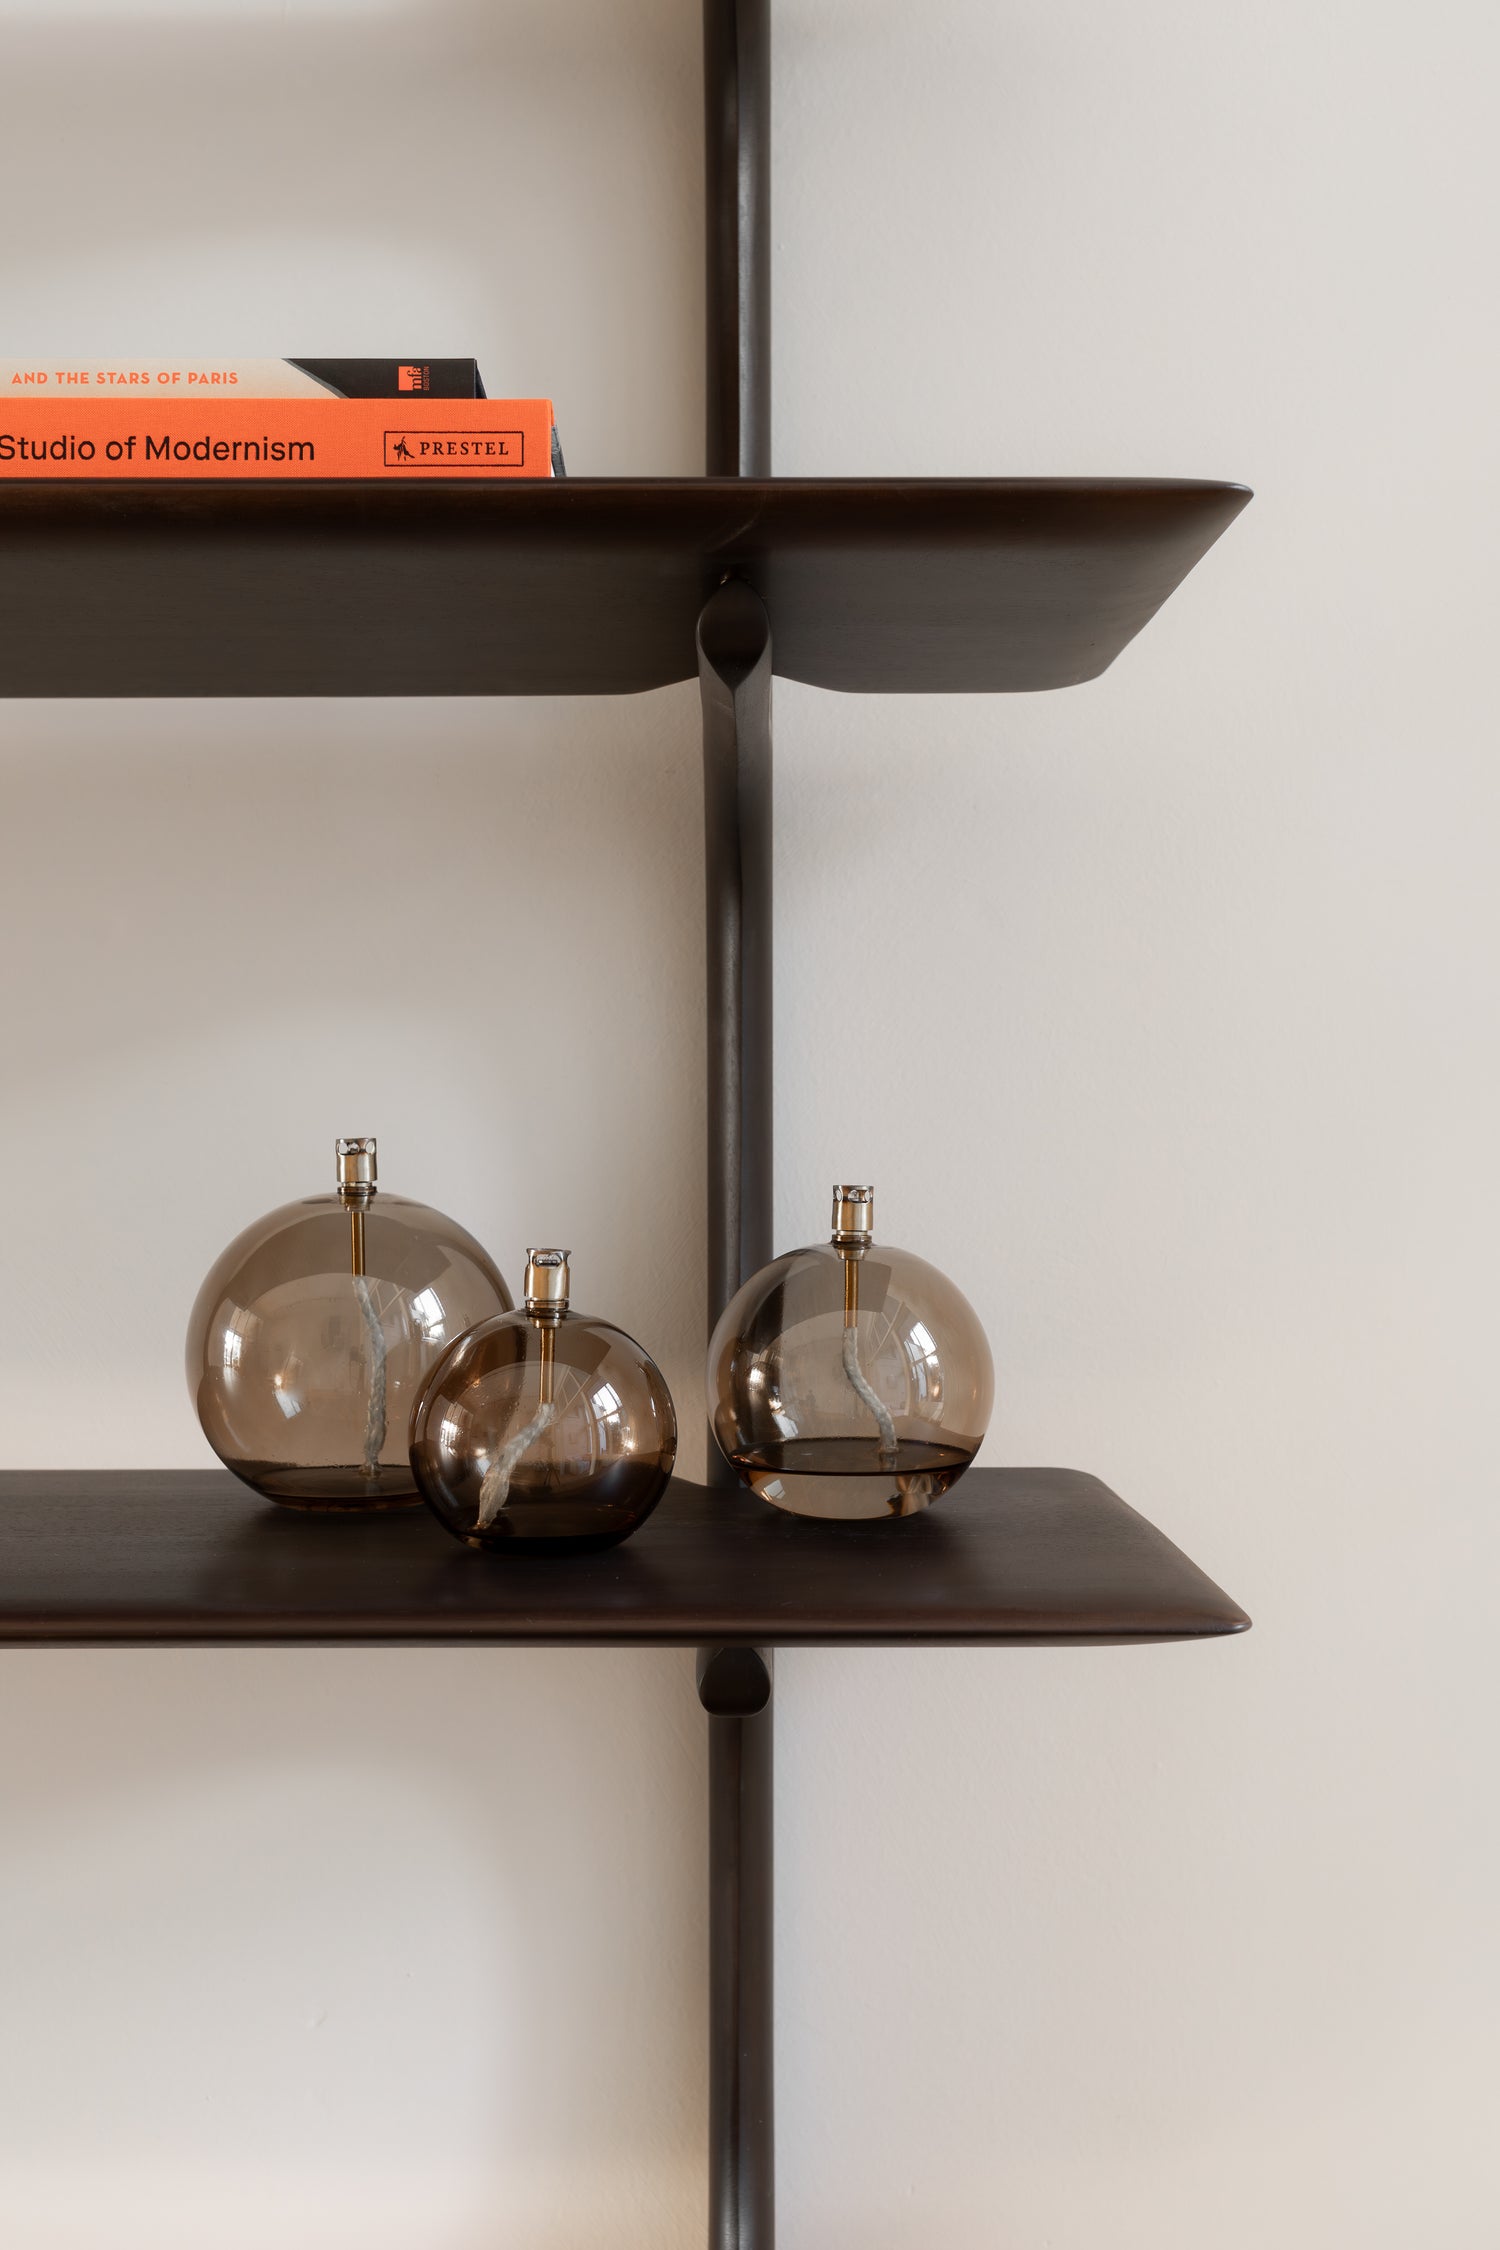 PI Wall Shelf 2 Dark Brown by Ethnicraft with decoration details